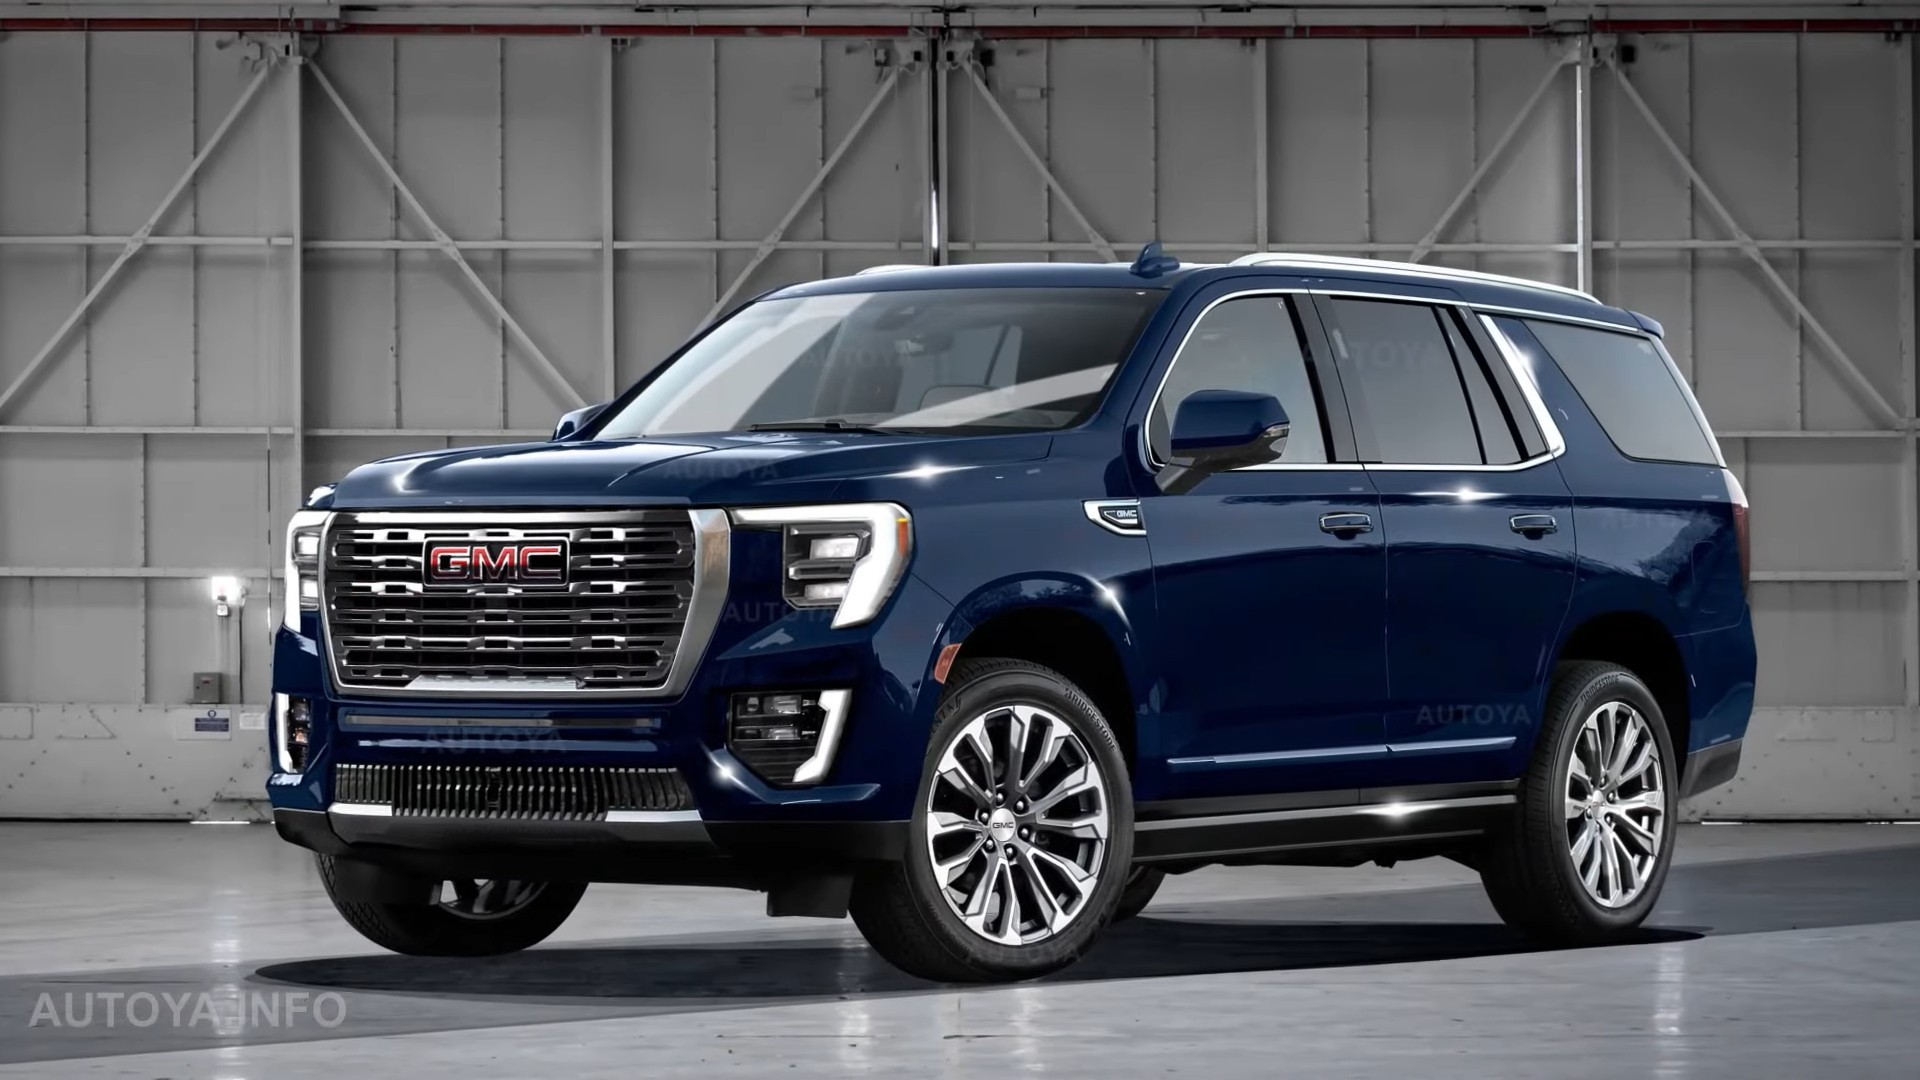 Redesigned Gmc Yukon Suv Unofficially Flaunts Only The Ritzy